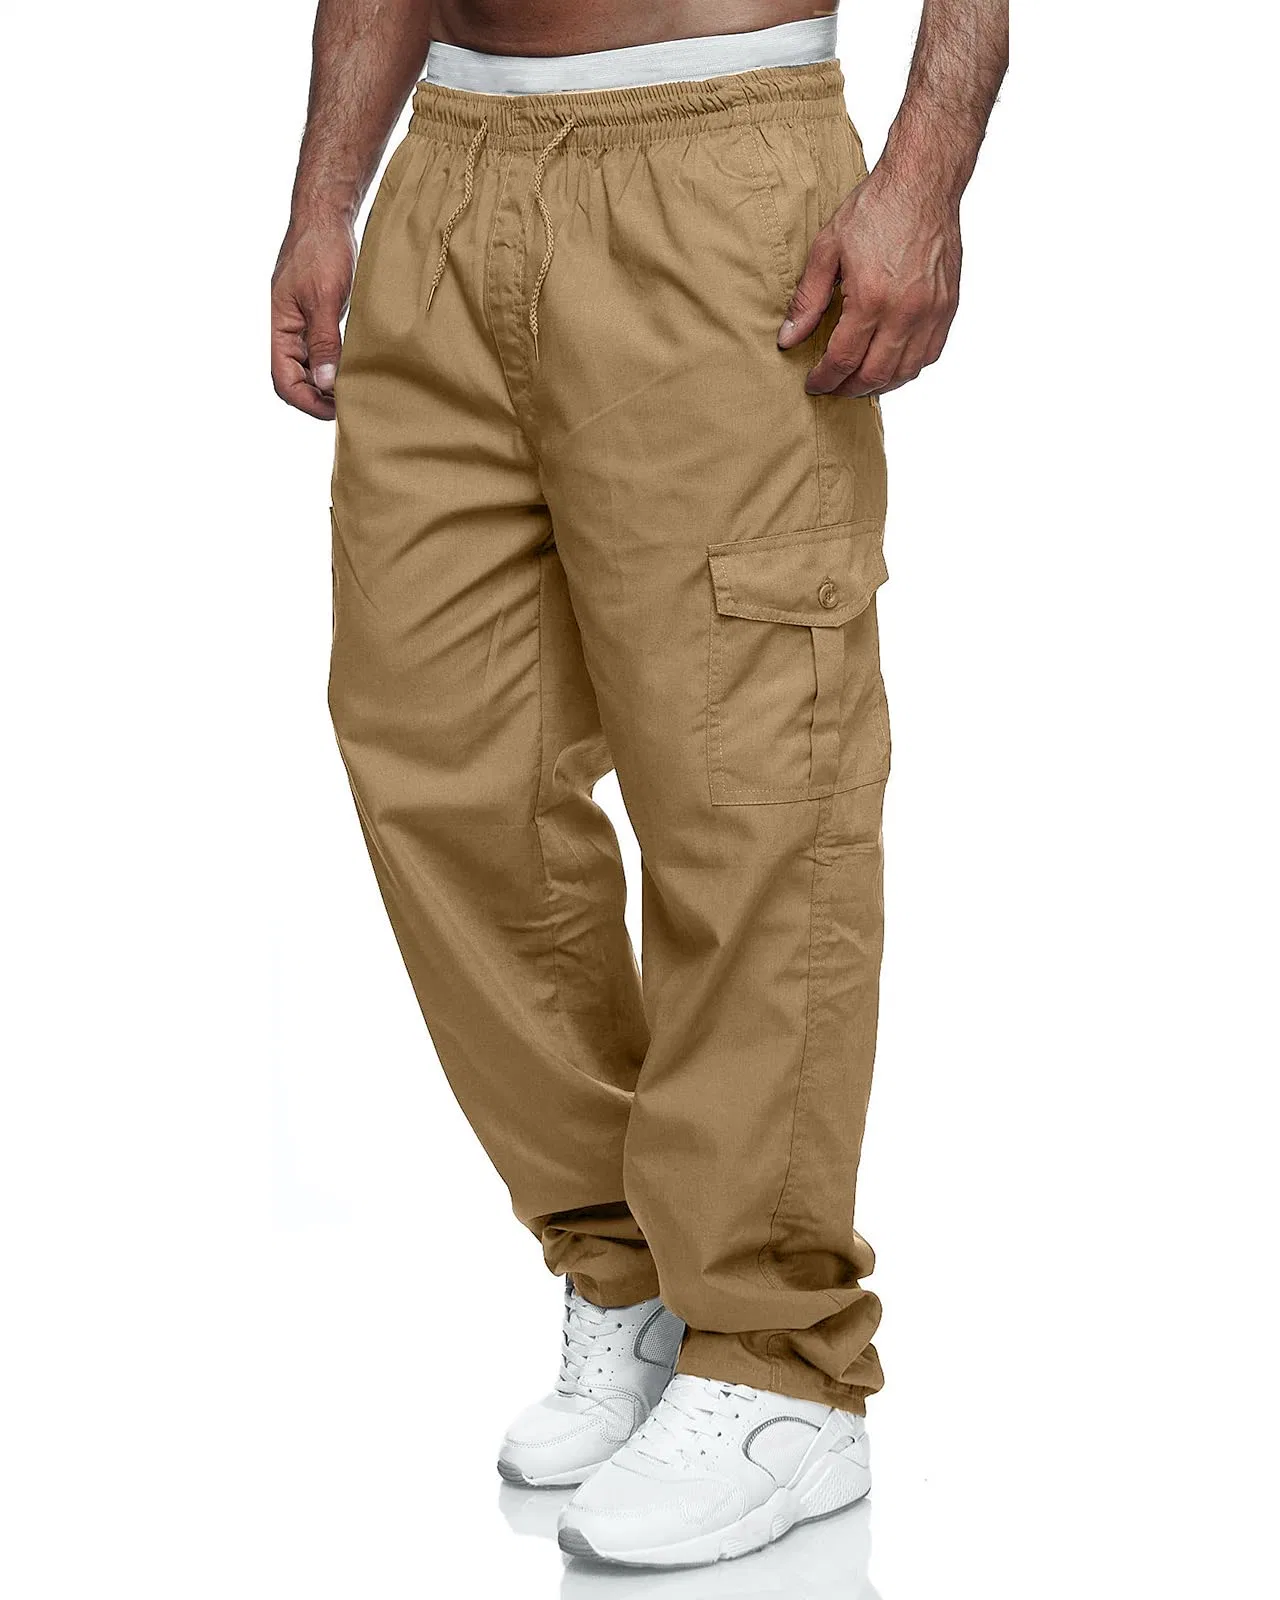 Custom Men's Outdoor Trousers Relaxed Fit Sport Pants Jogger Sweatpants Drawstring Cargo Pants with Pockets for Men